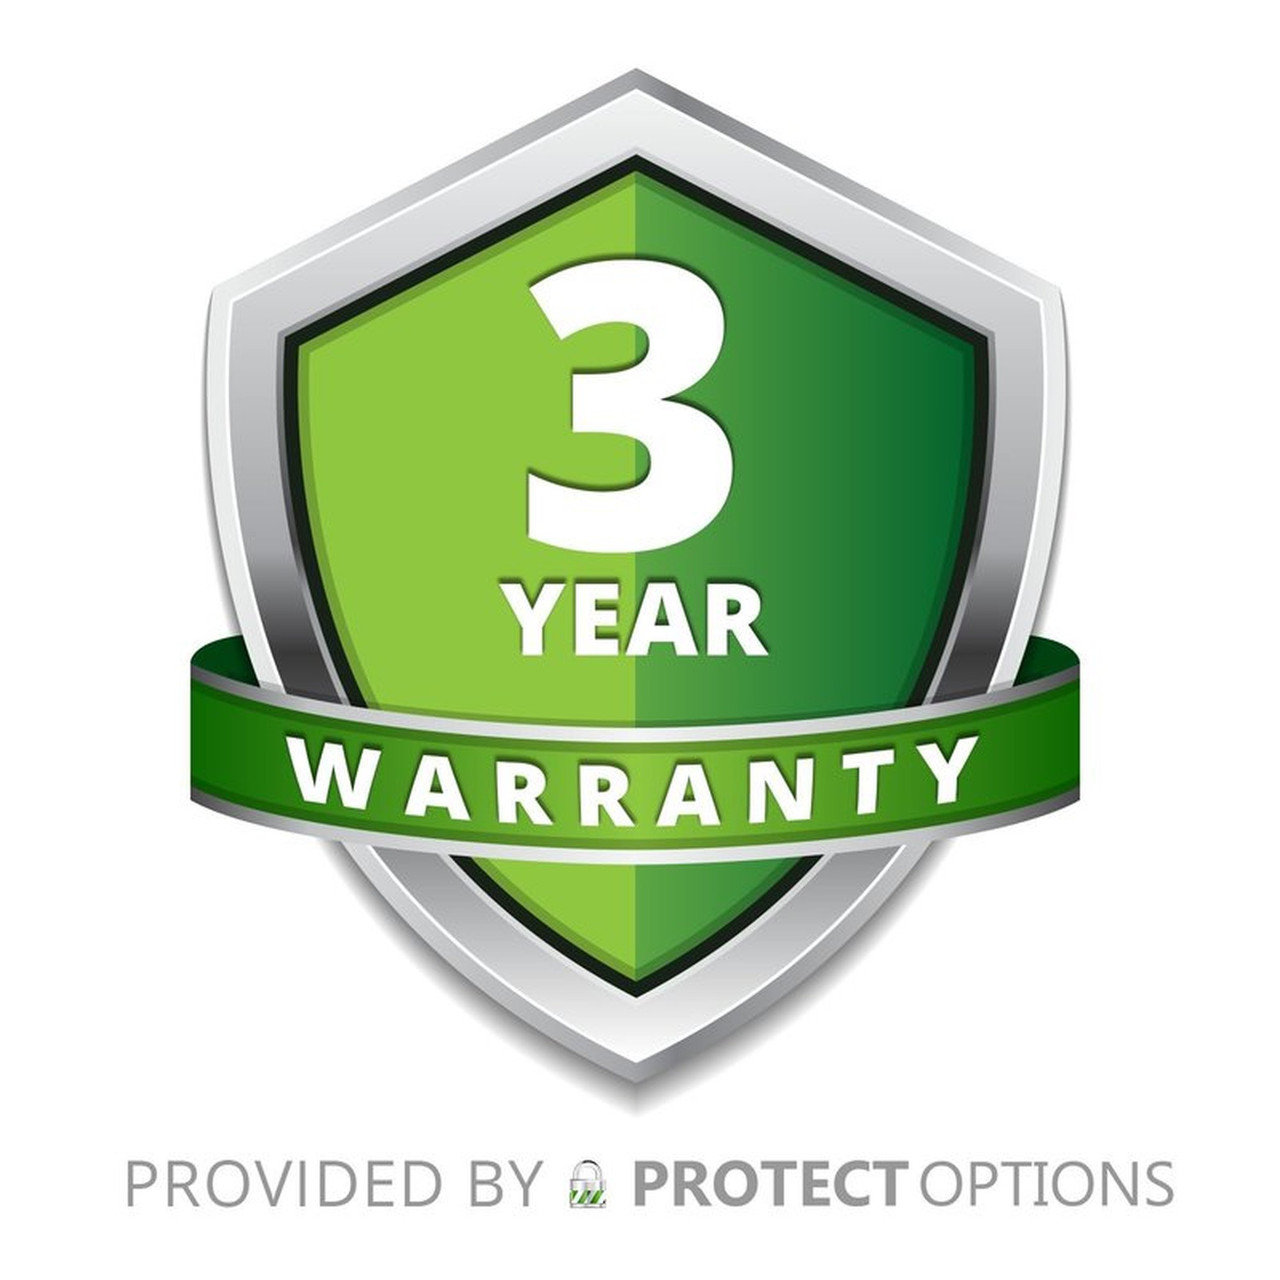 3 Year Warranty No Deductible - Tablets sale price of up to  $199.99